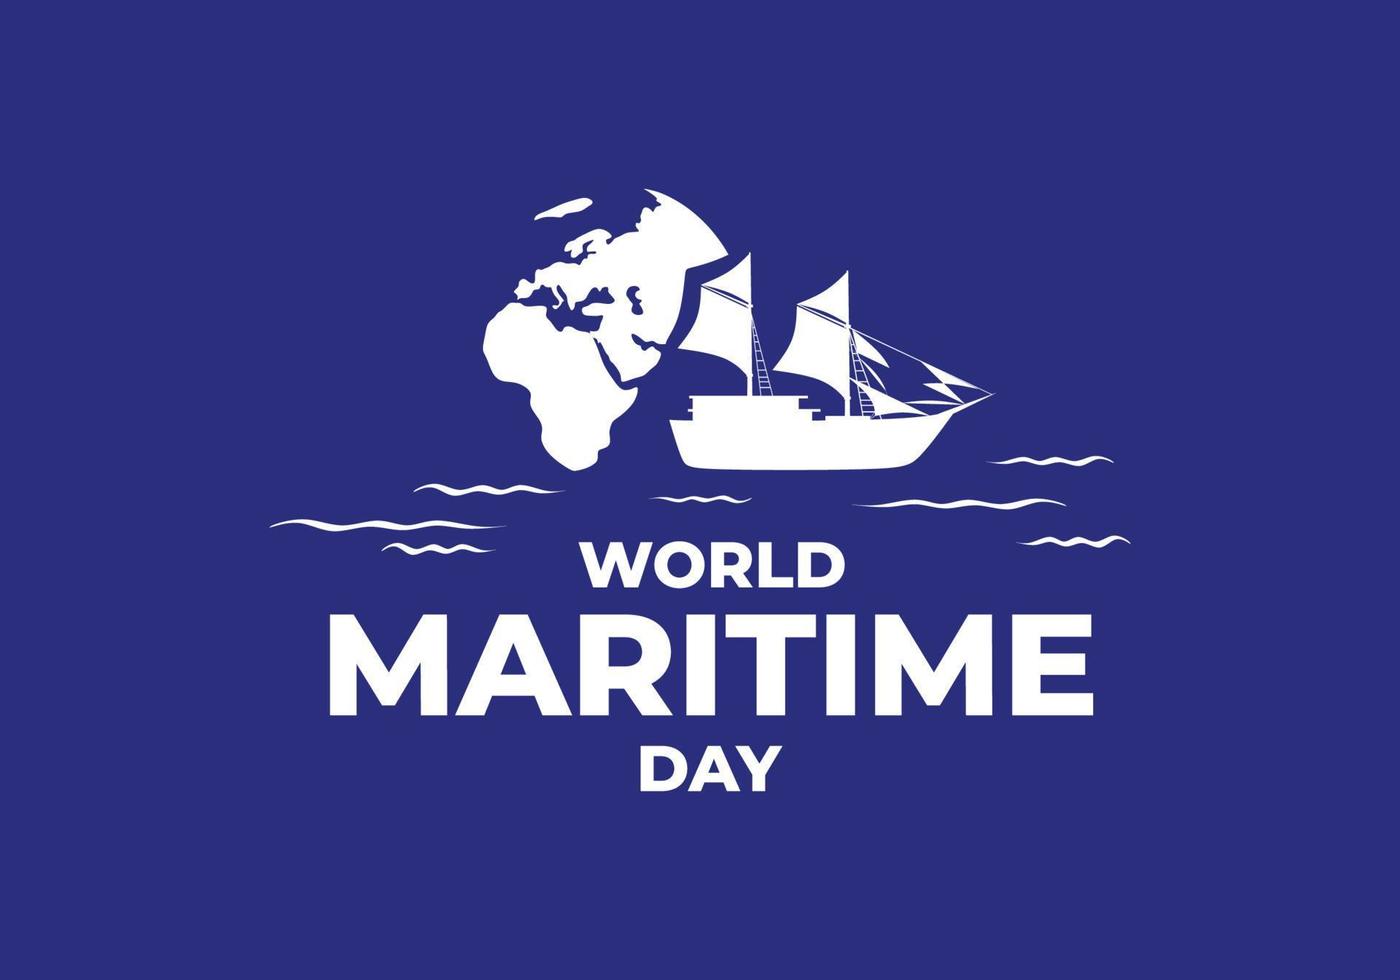 World maritime day background with earth map and big ship. 11414889